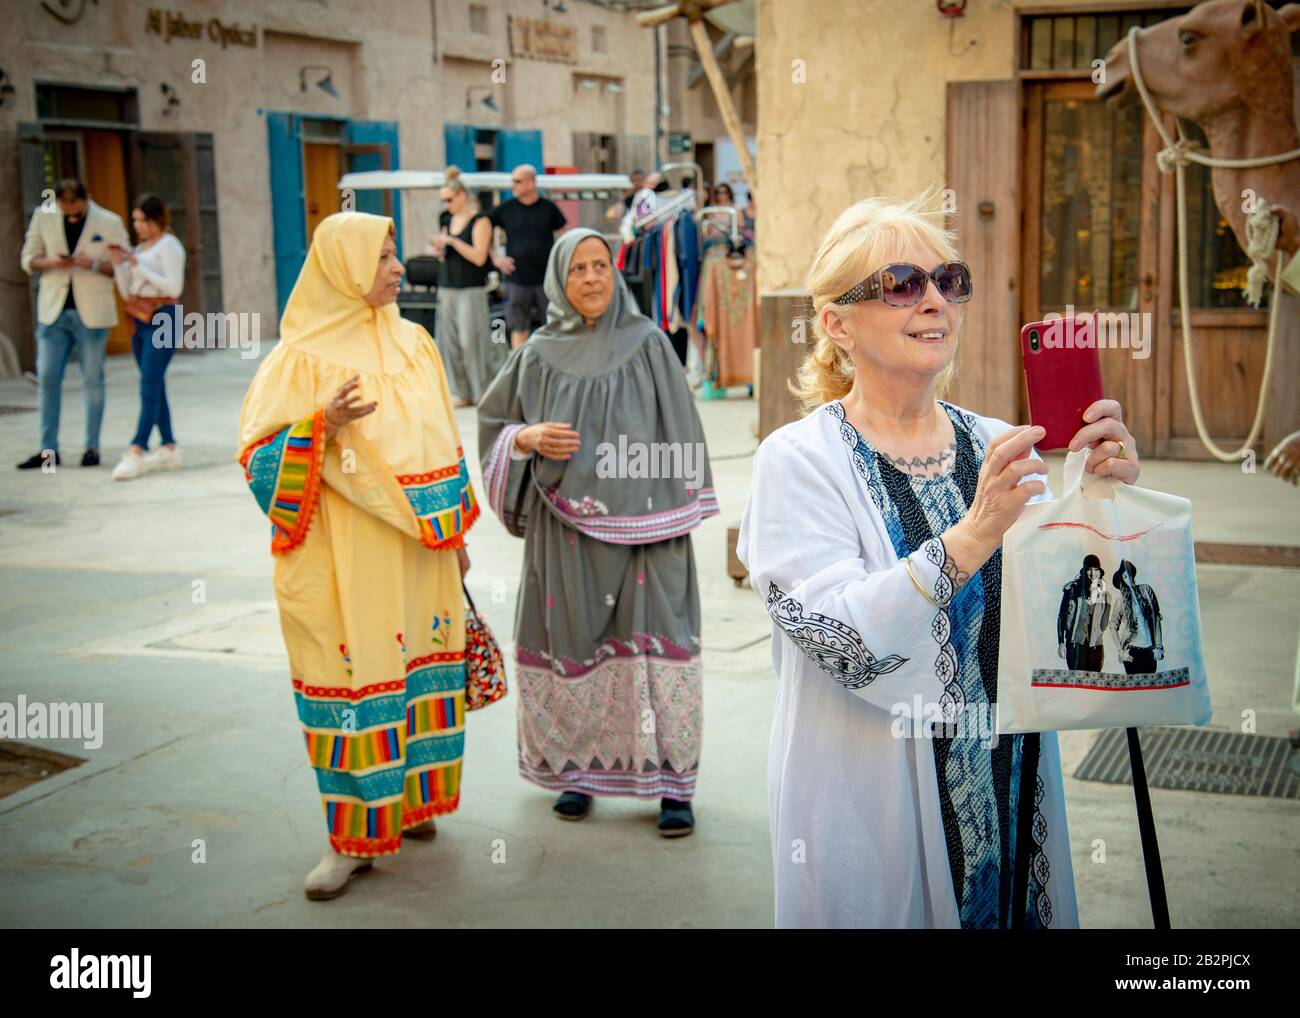 Middle aged lady/tourist taking photos on iphone at old town market in Dubai UAE Stock Photo